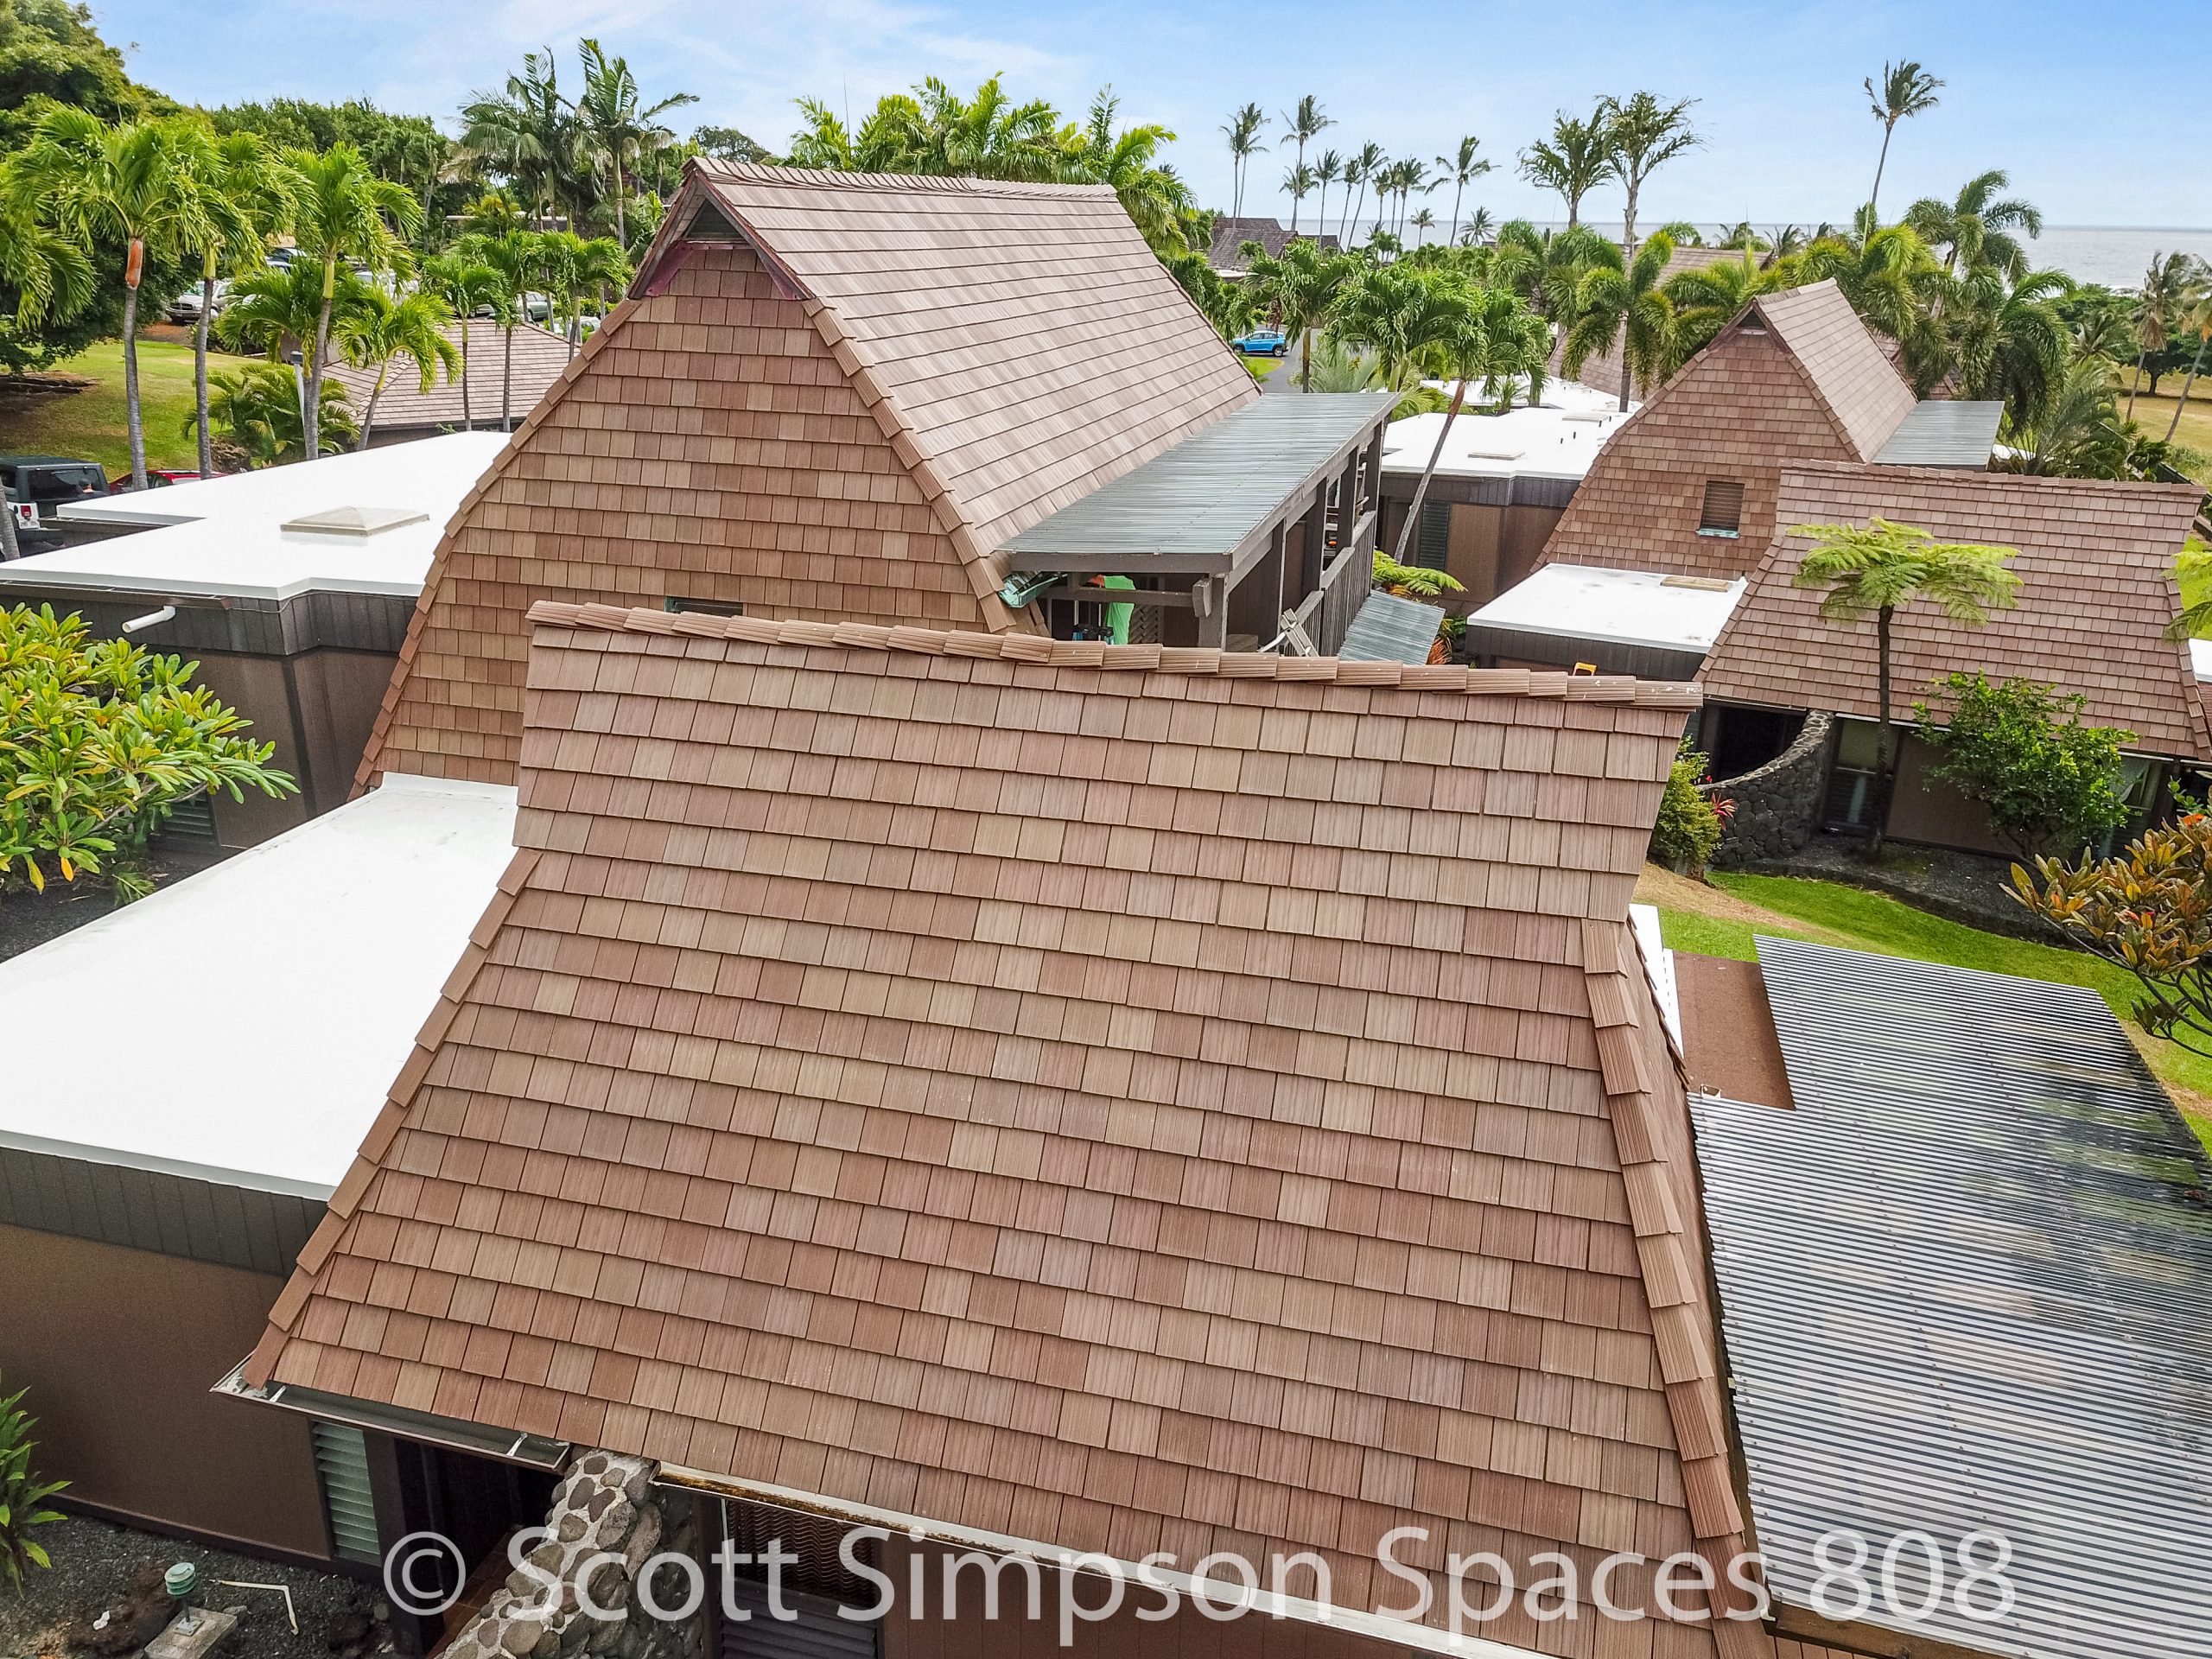 Reroofing with Polymer Shakes to Withstand Hawaii’s Sun, Salt Spray and Wind